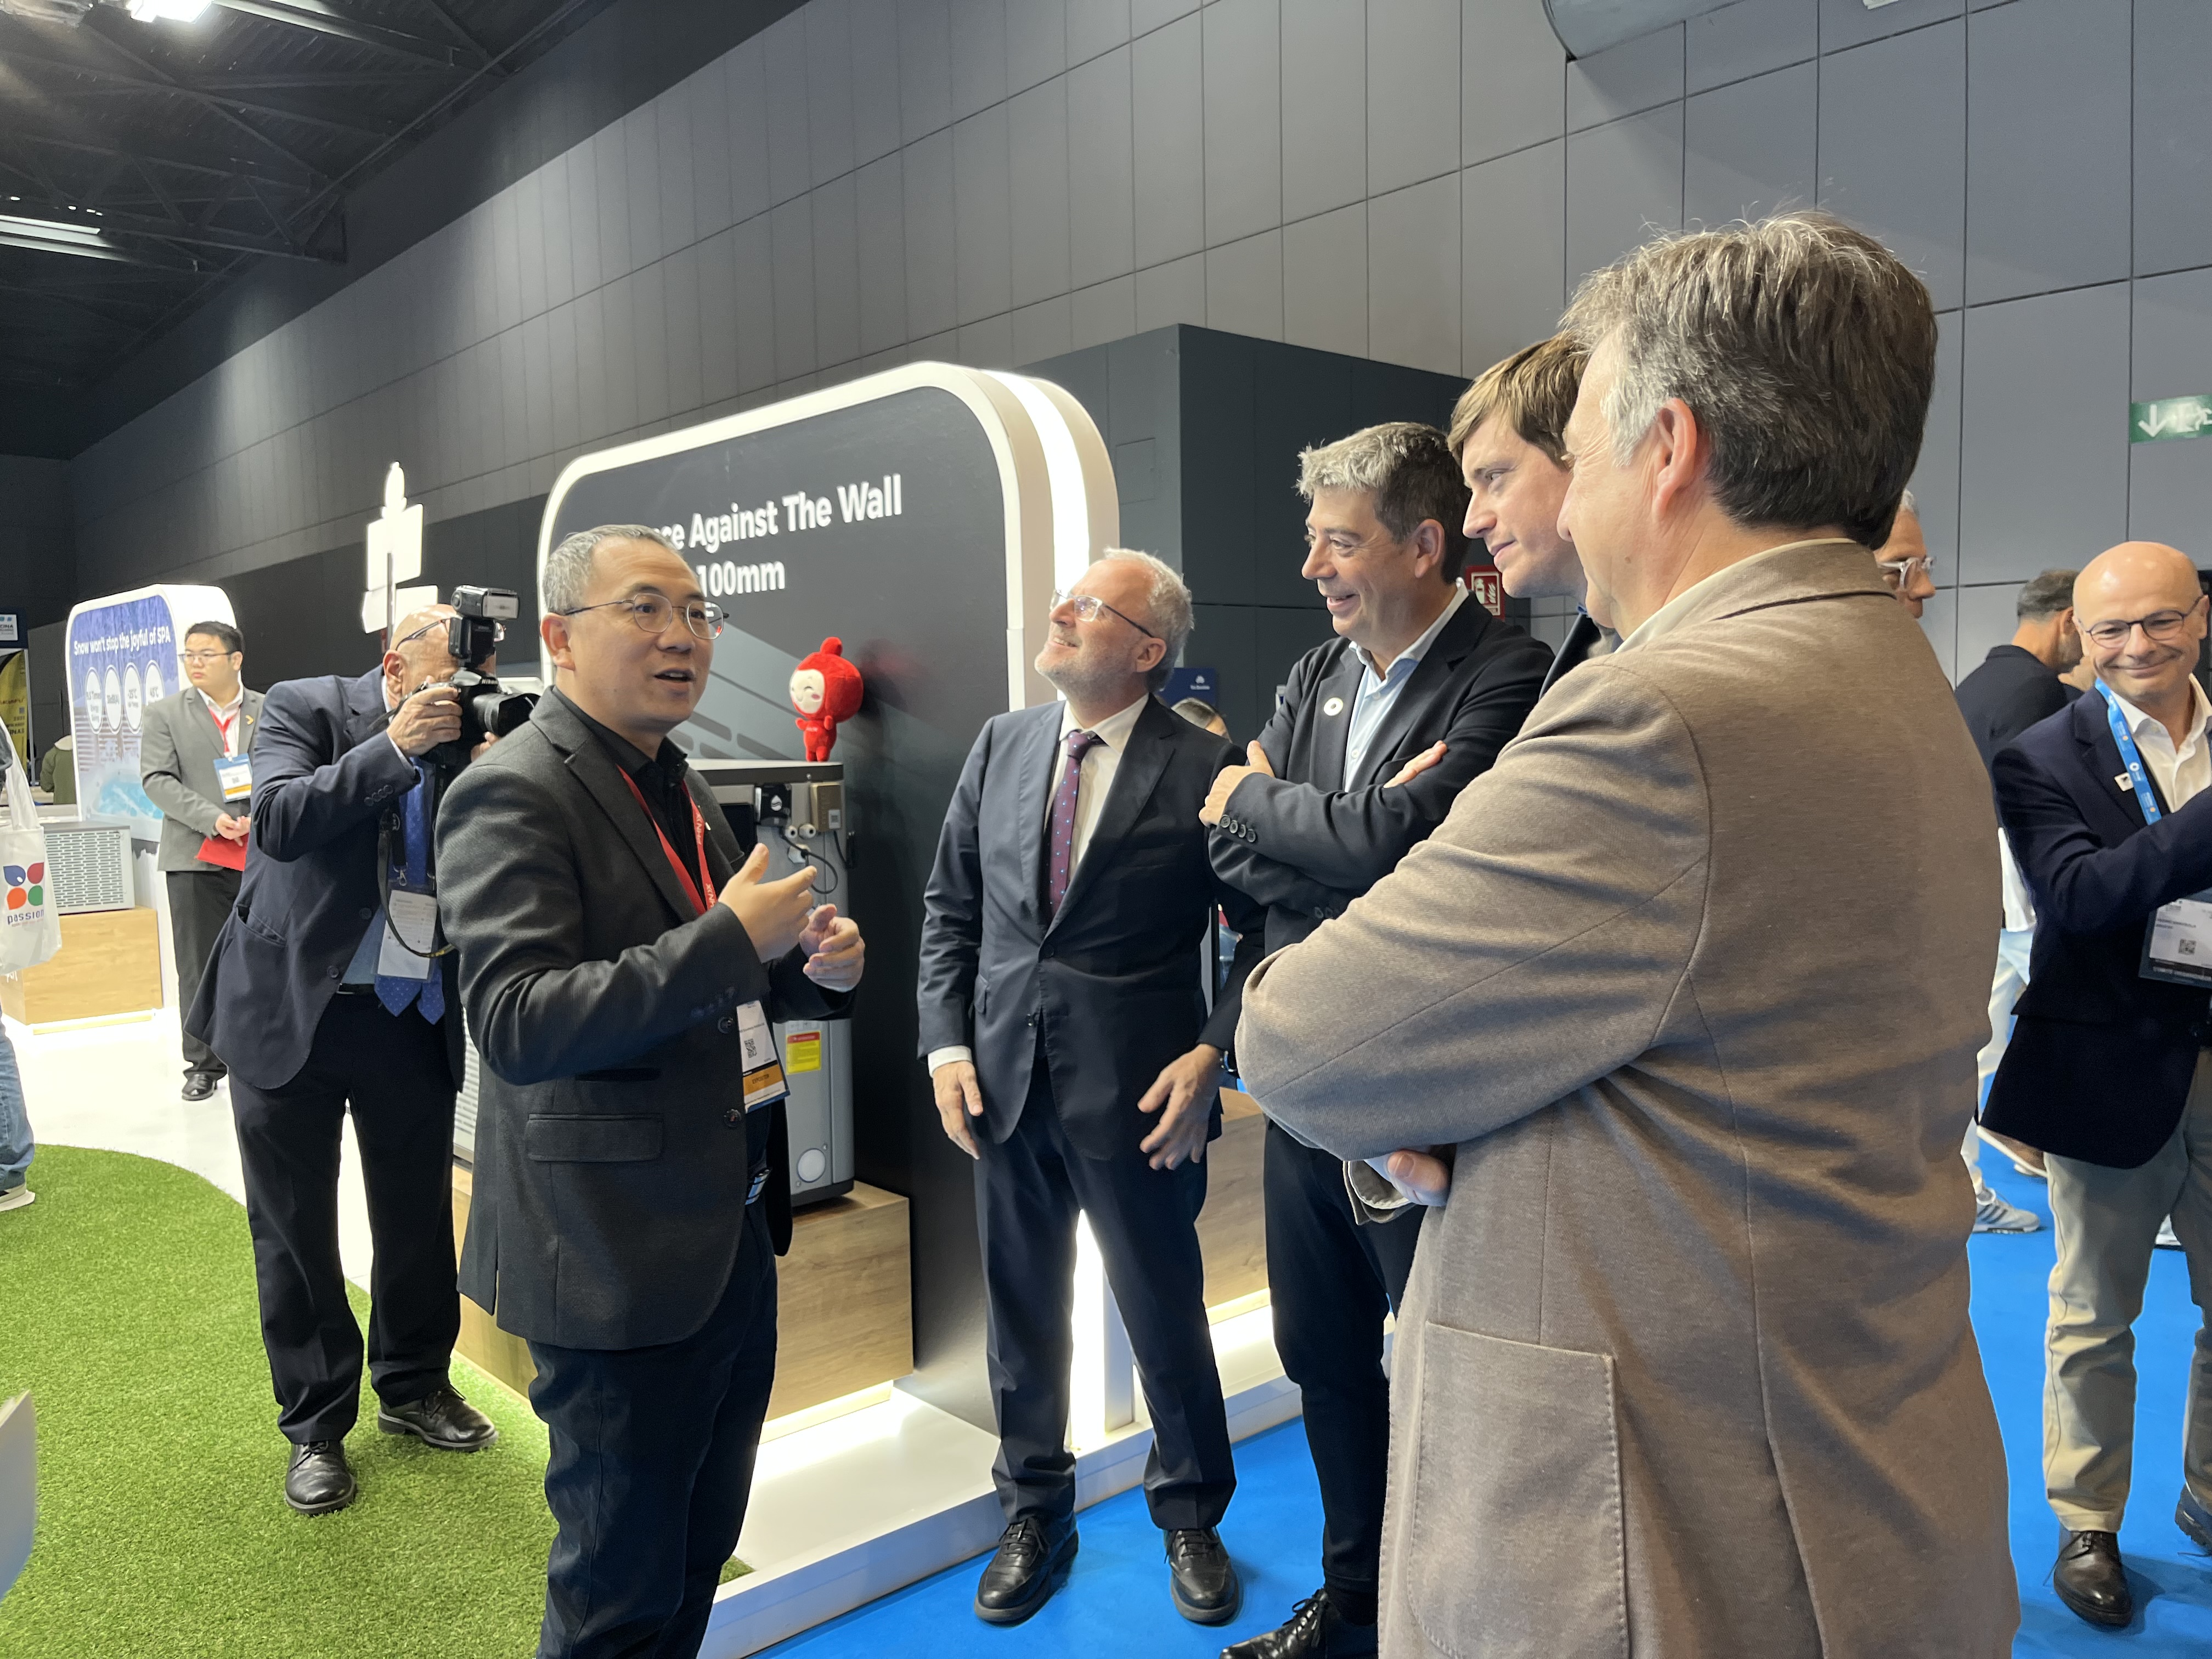 PHNIX Shines Bright: Pool Heat Pump Innovations Take Center Stage in Barcelona